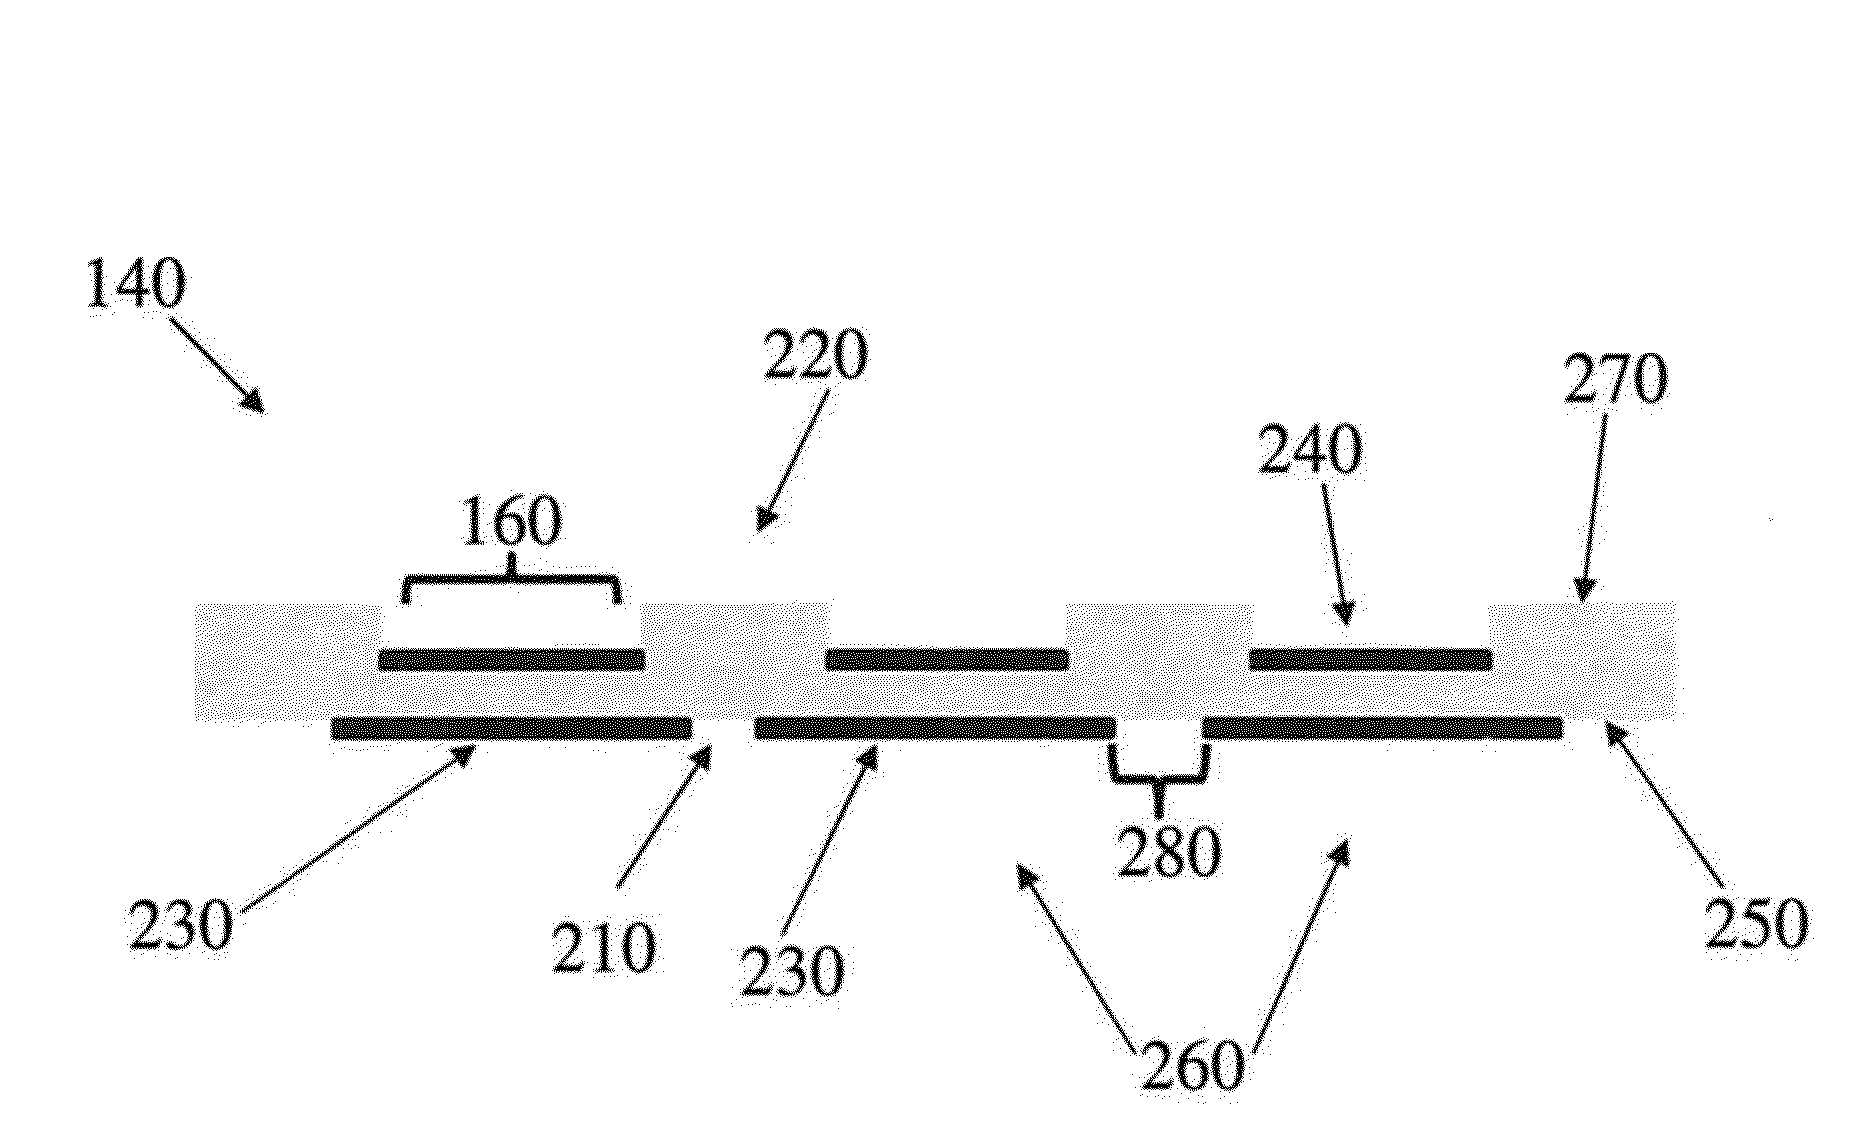 Method of stress relief in Anti-reflective coated cap wafers for wafer level packaged infrared focal plane arrays